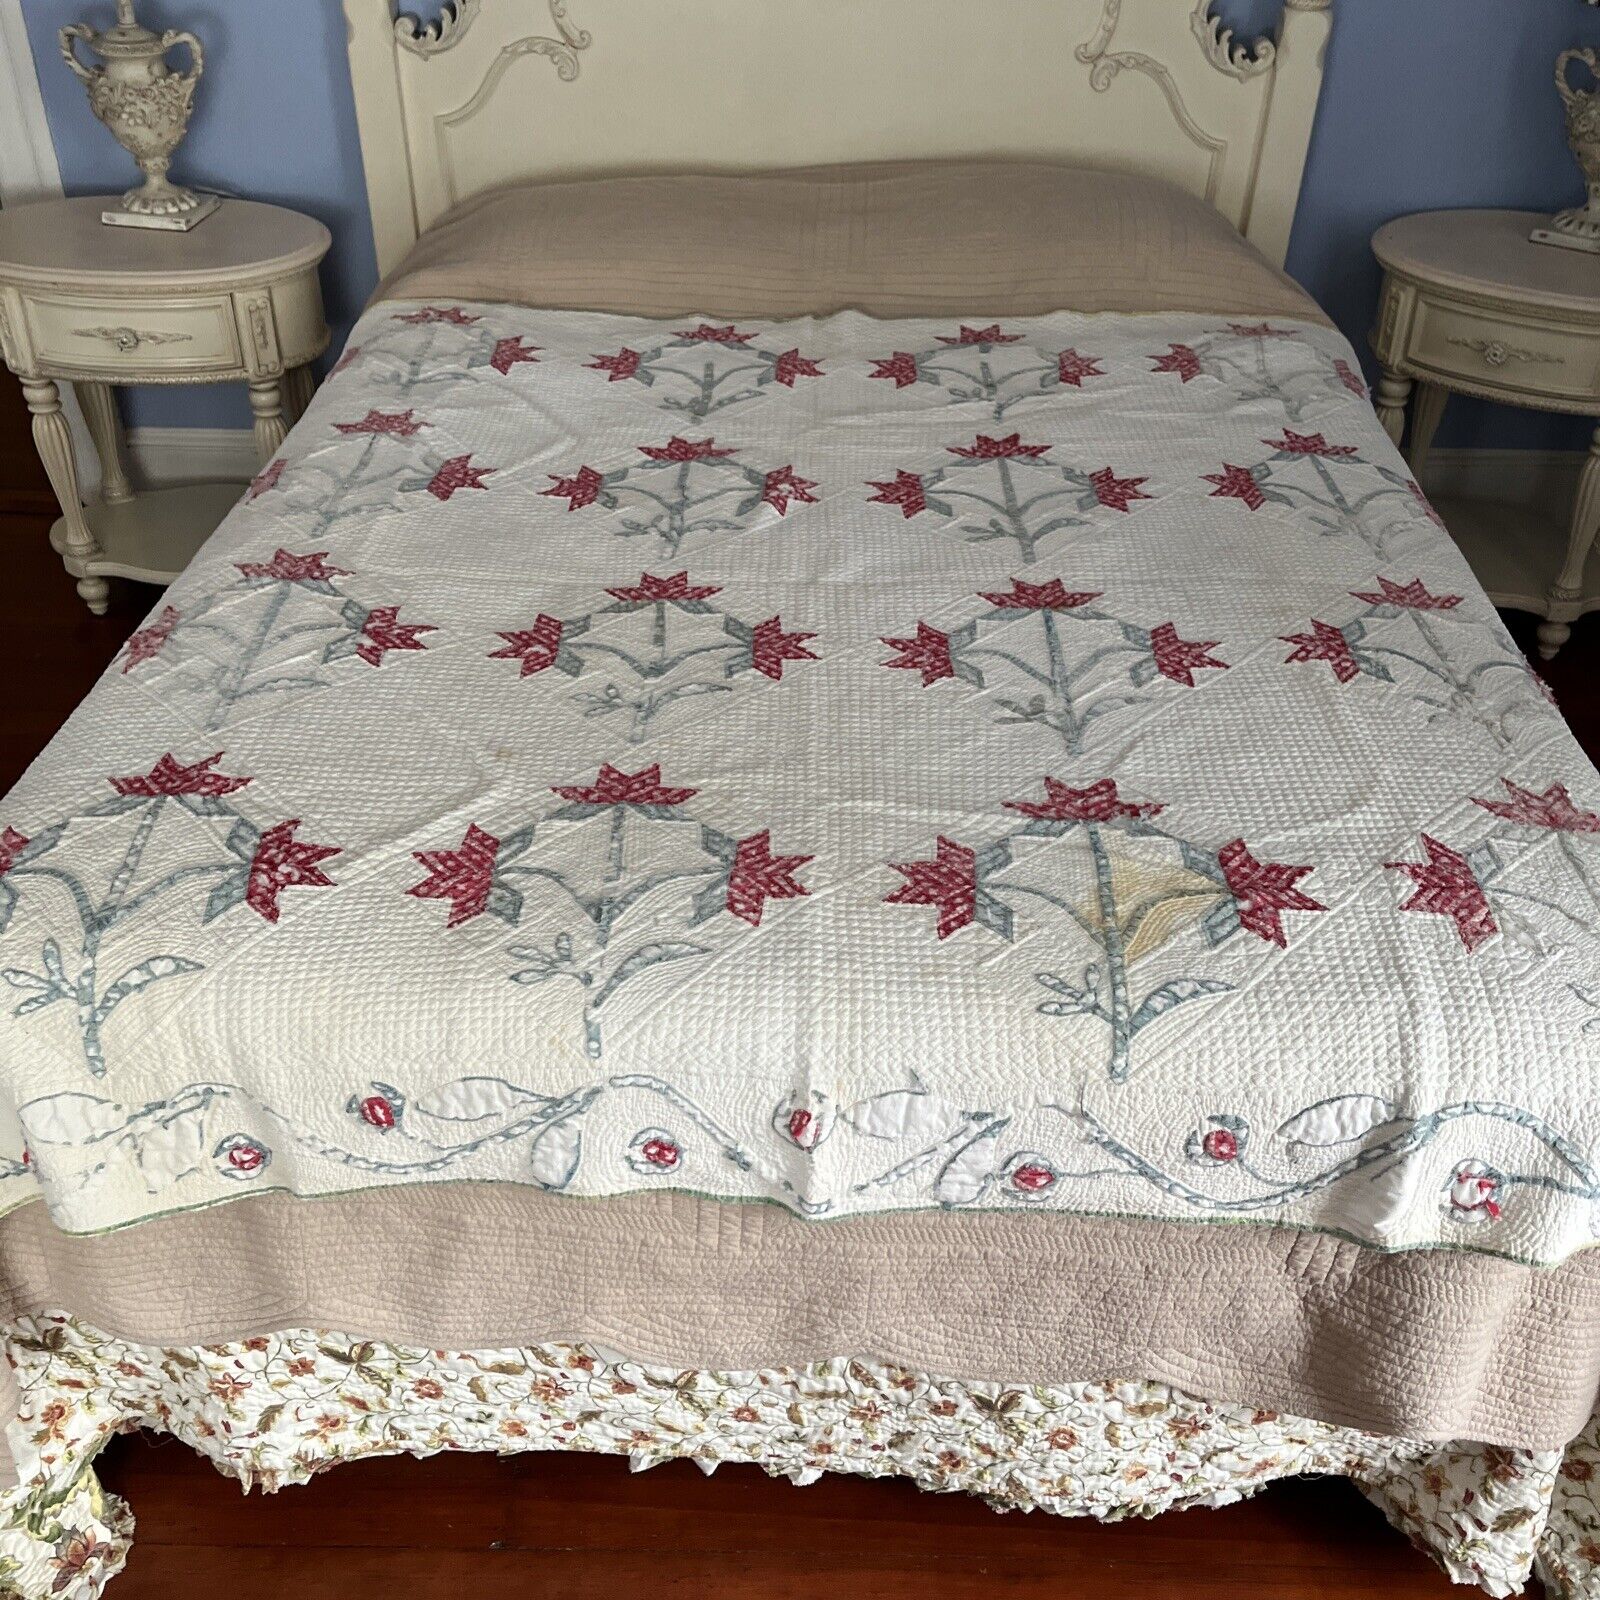 Vintage Quilt Handmade Floral Off White Red Green Soft 81x68 Quilted